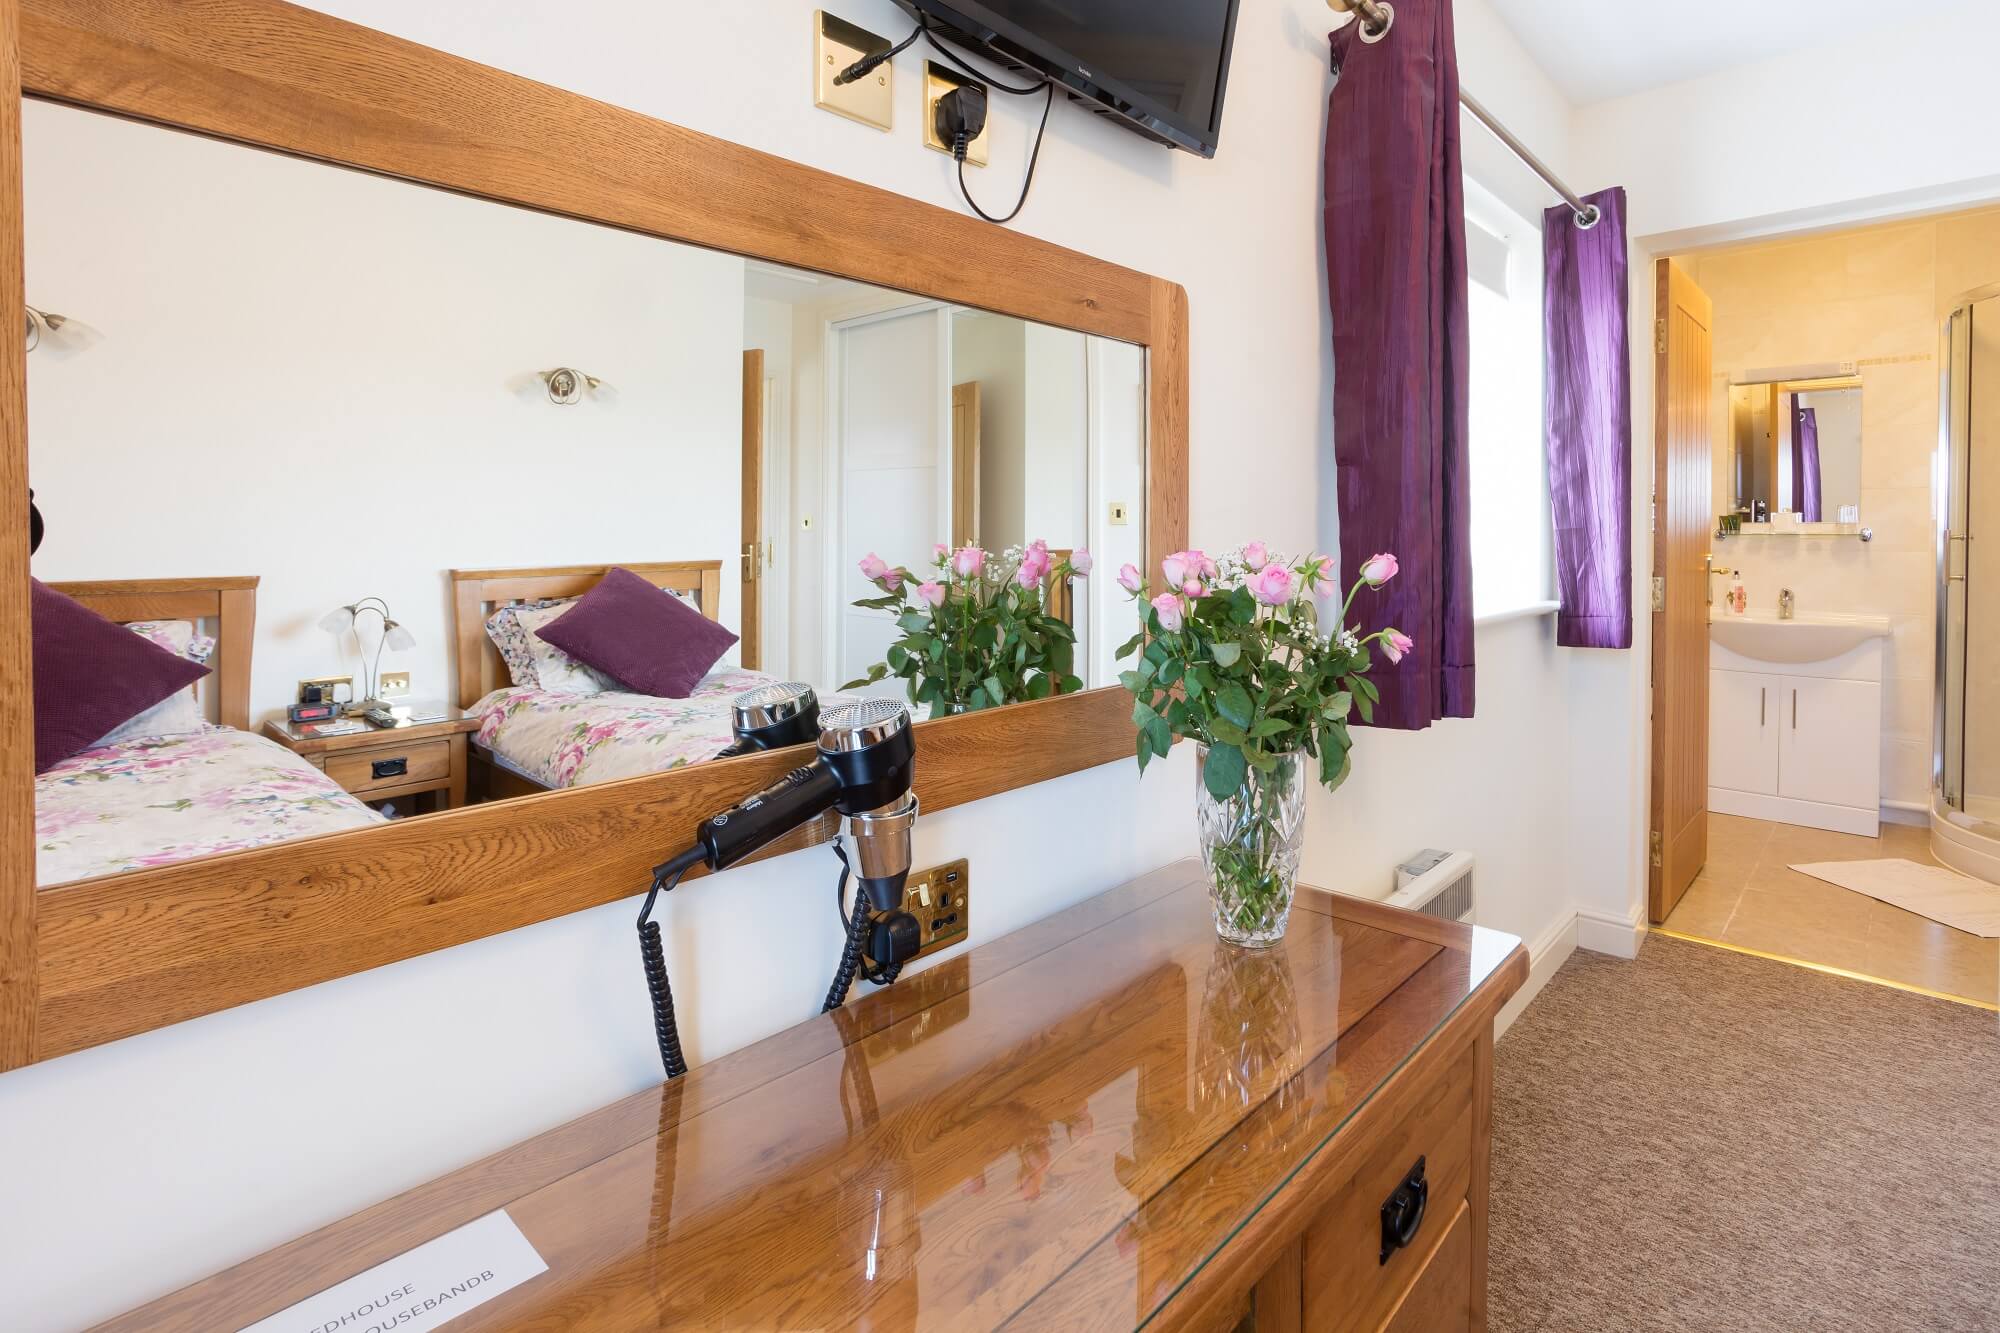 En suite in Suite 2, a room in Redhouse Farm Bed & Breakfast, Lincolnshire